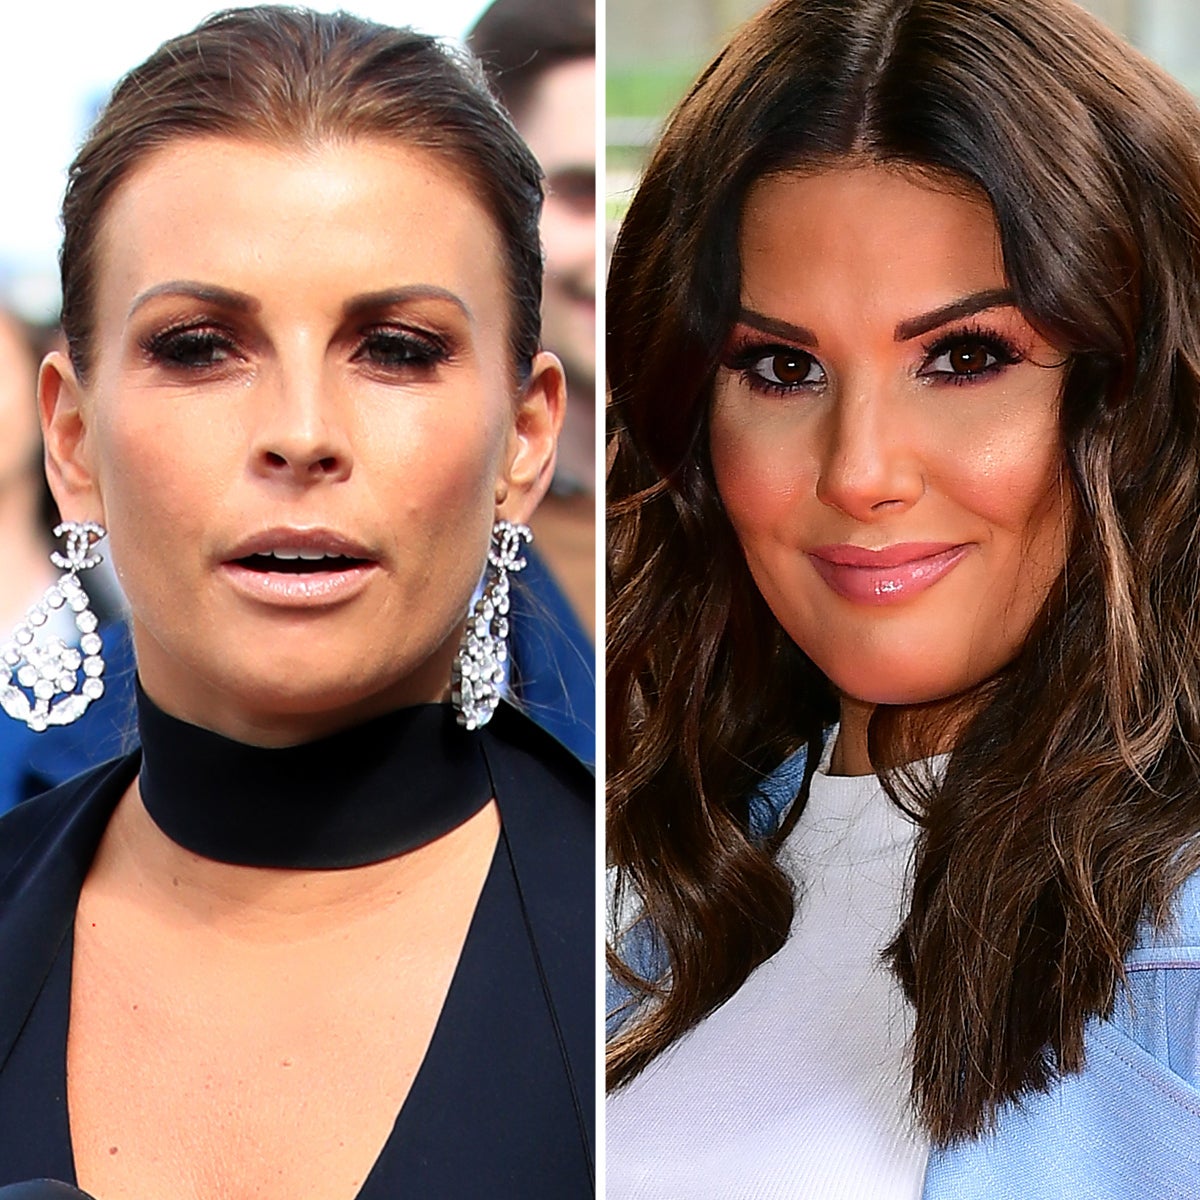 Coleen Rooney and Rebekah Vardy are in court over an Instagram story Rooney posted